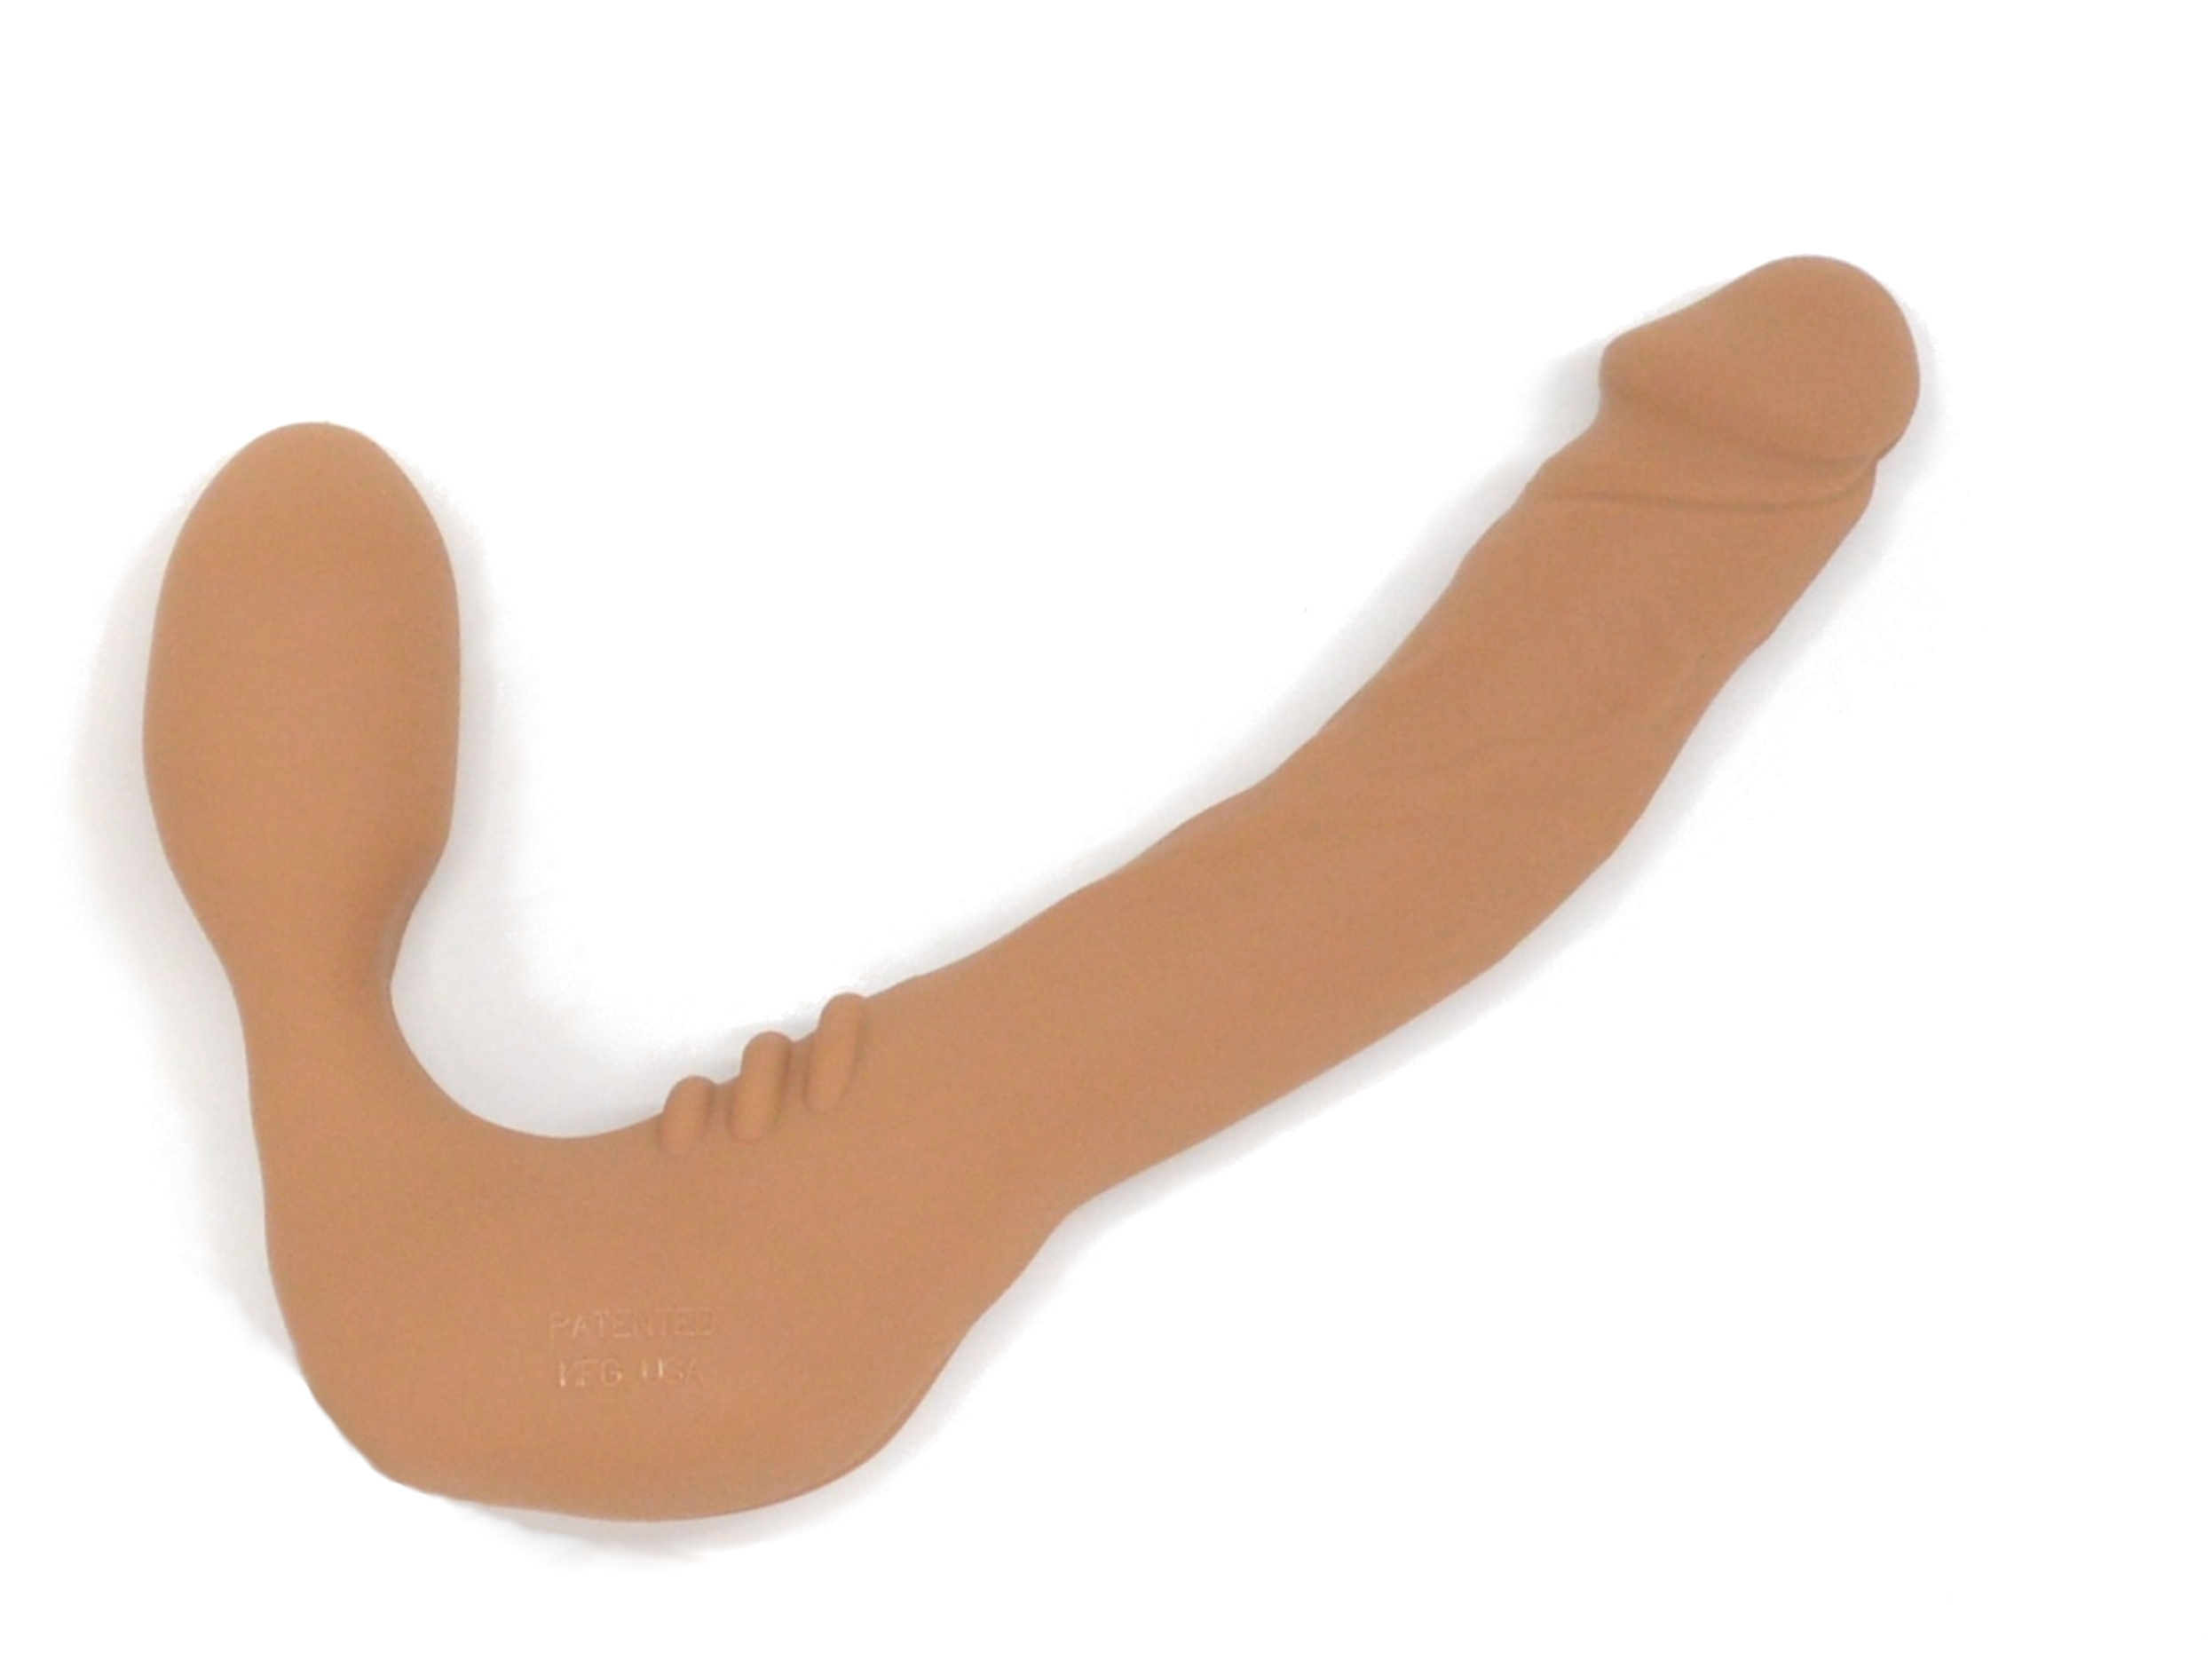 Realdoe Slim is the smallest realistic strapless dildo in our line.